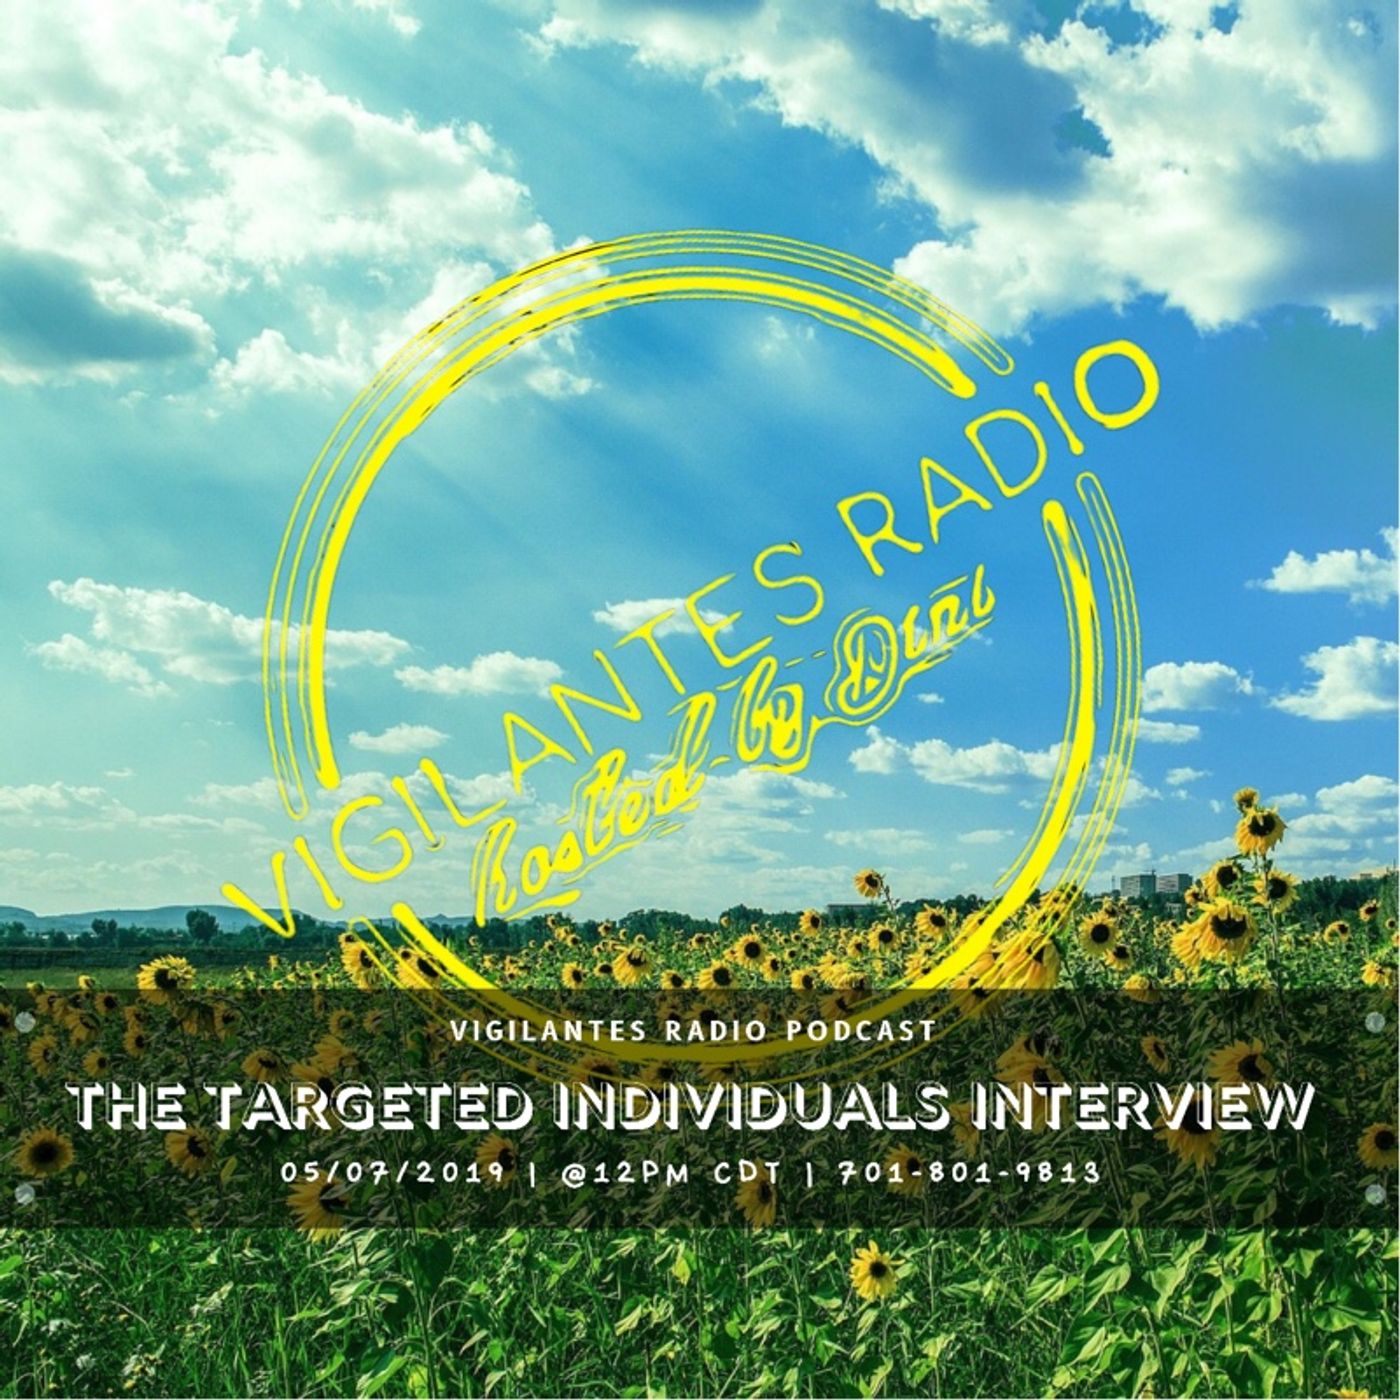 The Targeted Individuals Interview. Image